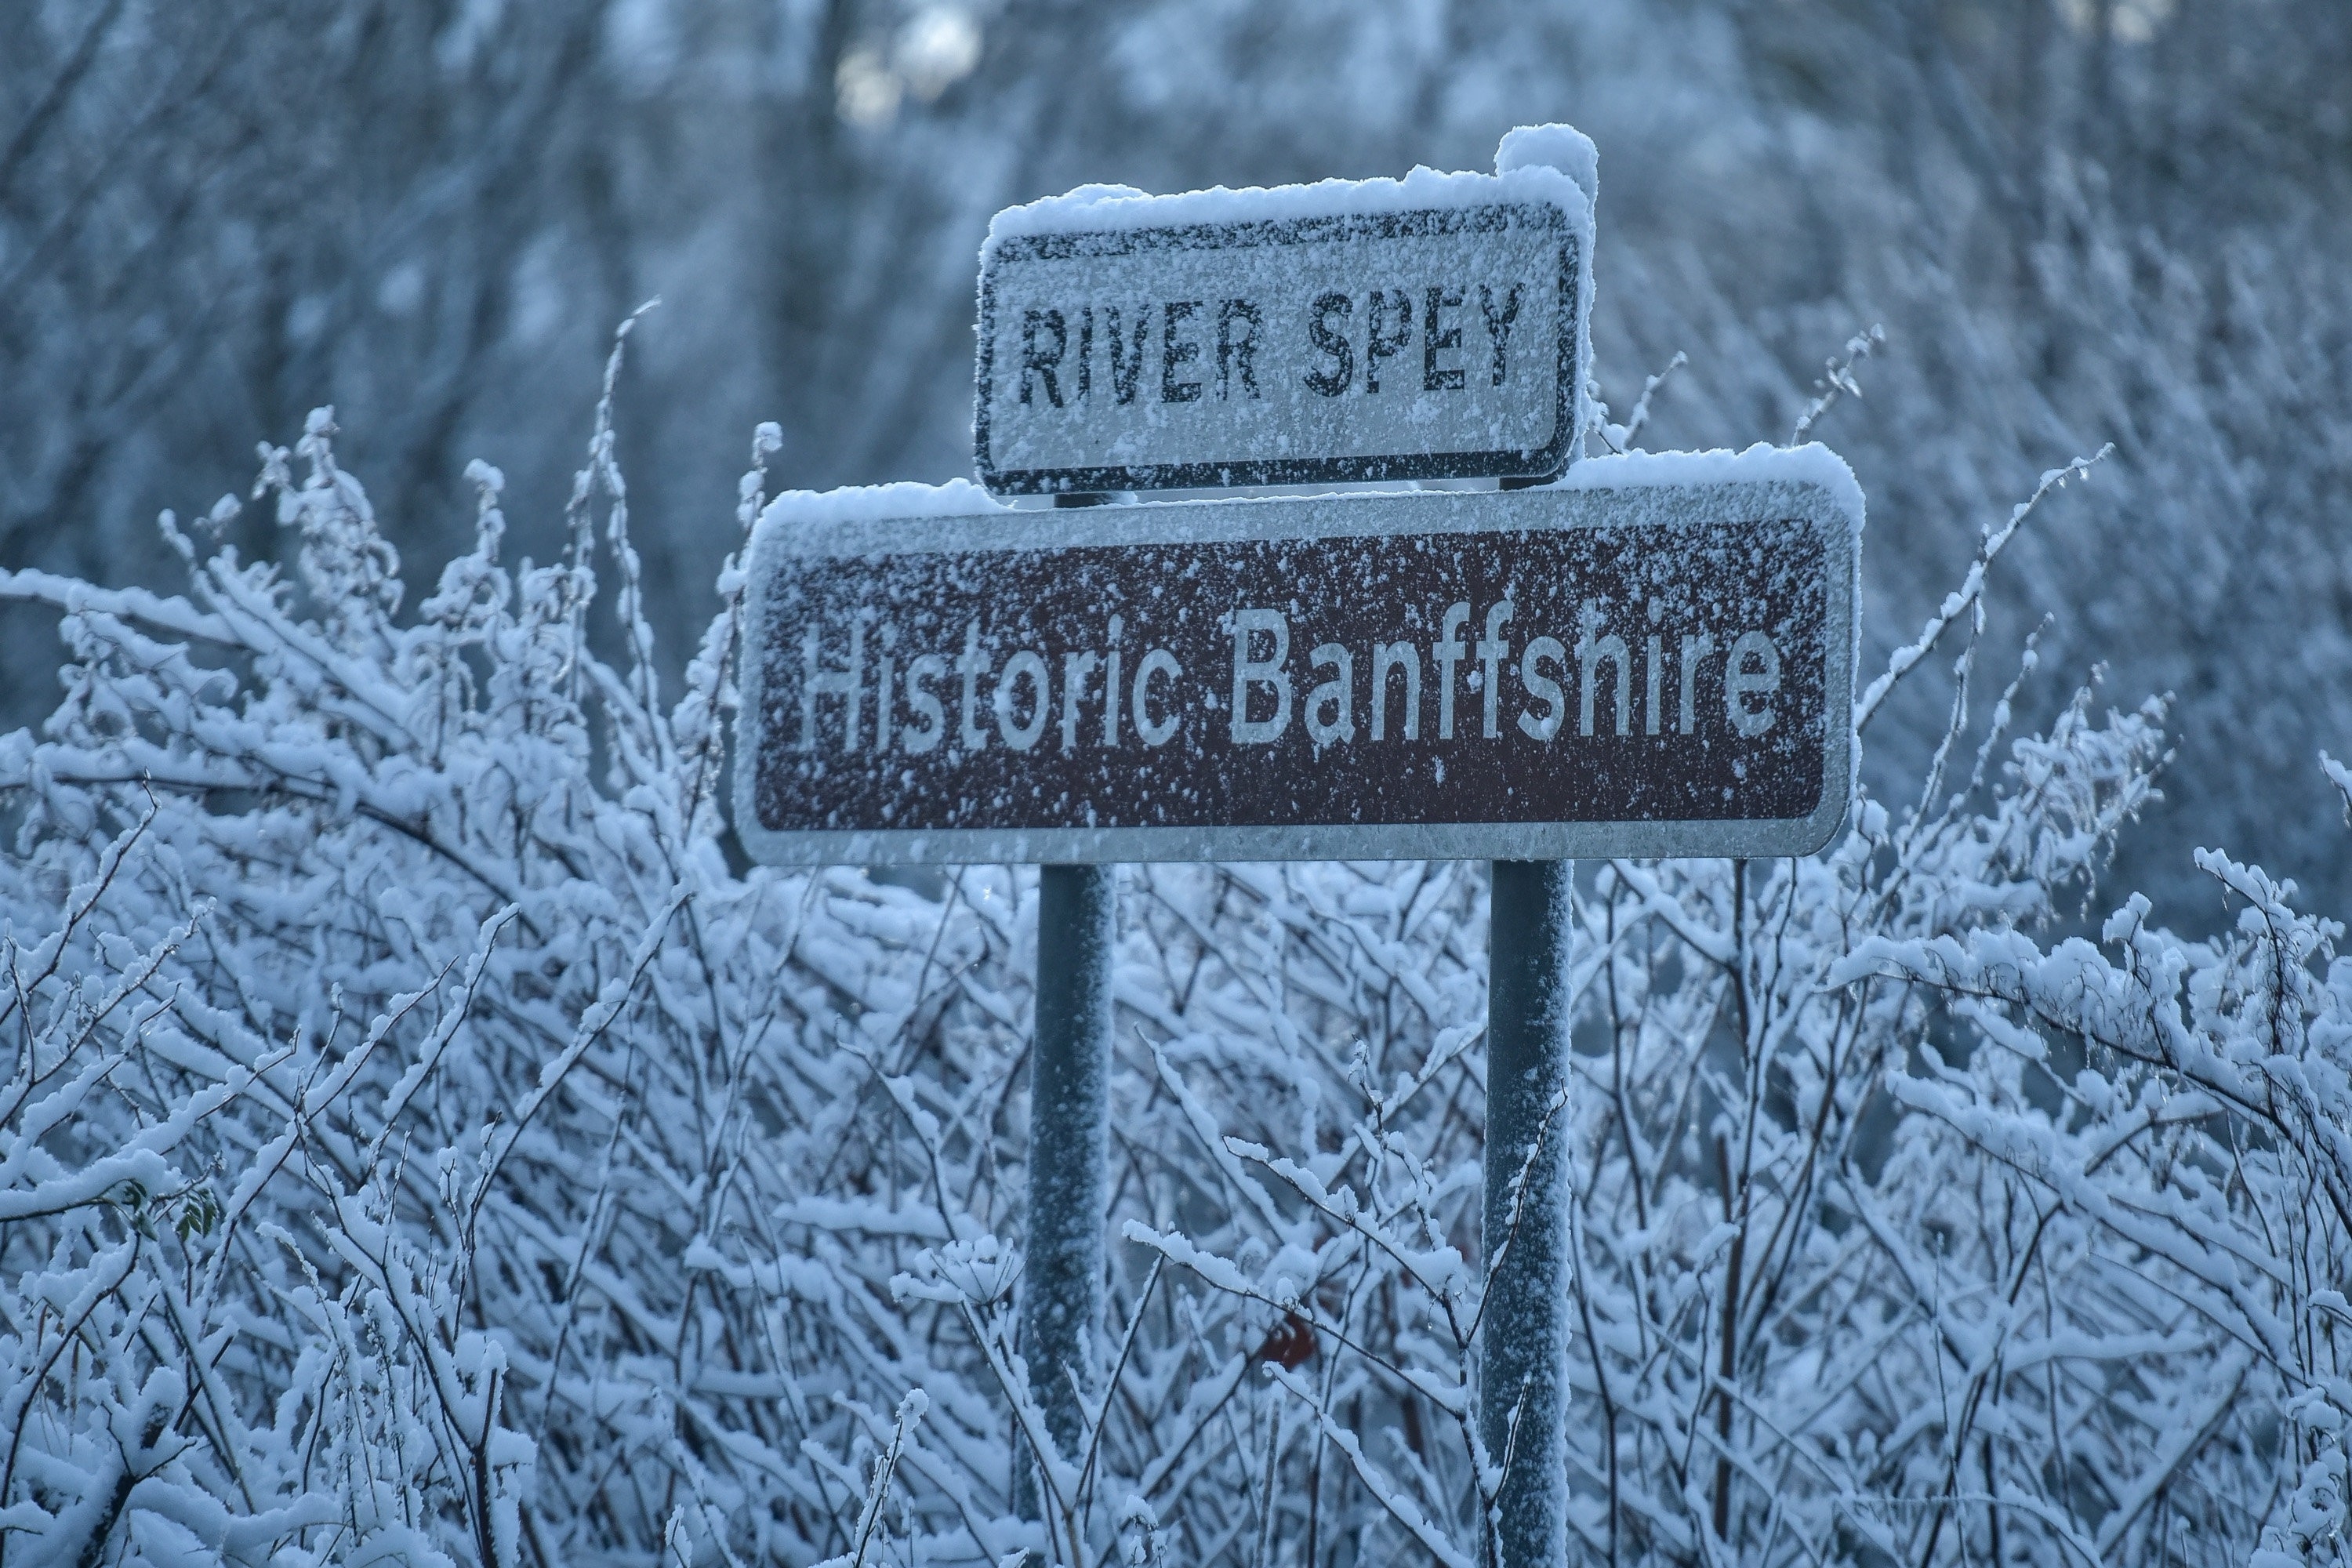 Snow covers a sign for the River Spey near Craigellachie, Moray on November 30 2015. Storm Clodagh has brought high winds and snow showers which covered the north of Scotland.